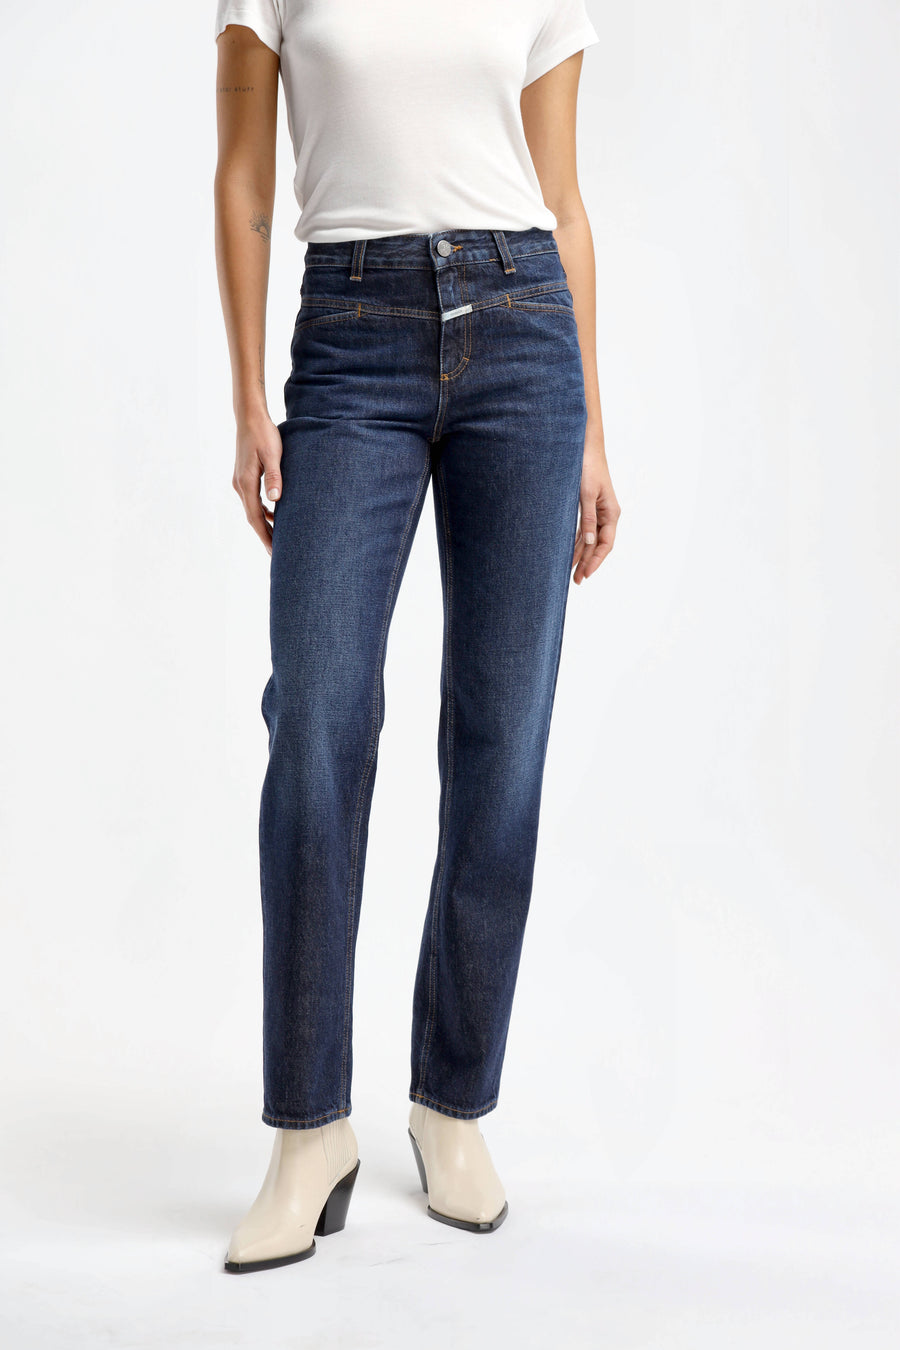 Jeans Straight-X in Dark BlueClosed - Anita Hass